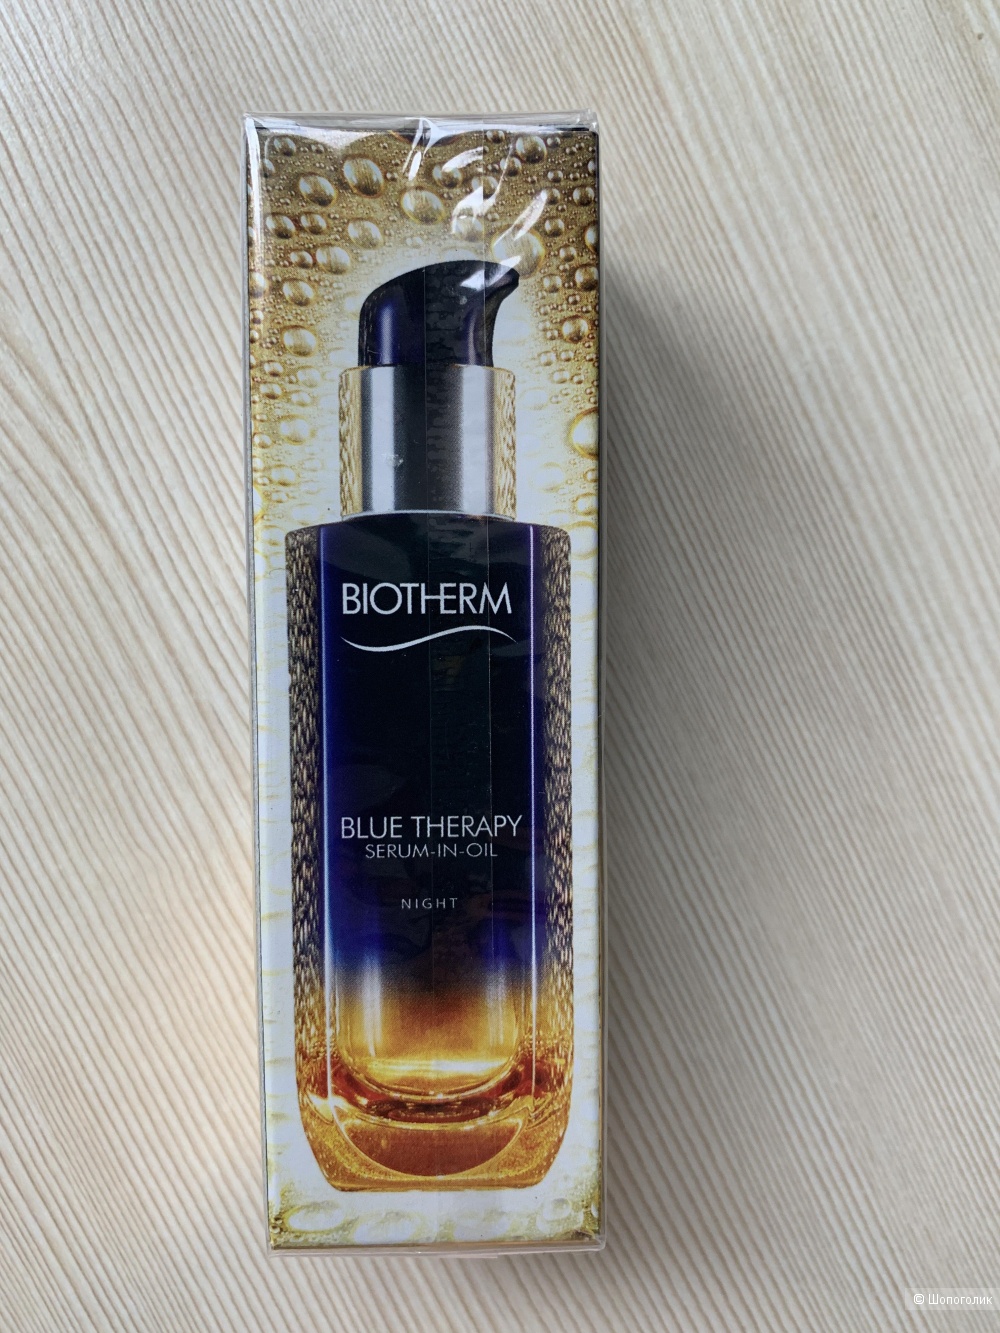 Biotherm Ночная сыворотка-масло Blue Therapy Serum in Oil, 30 мл.